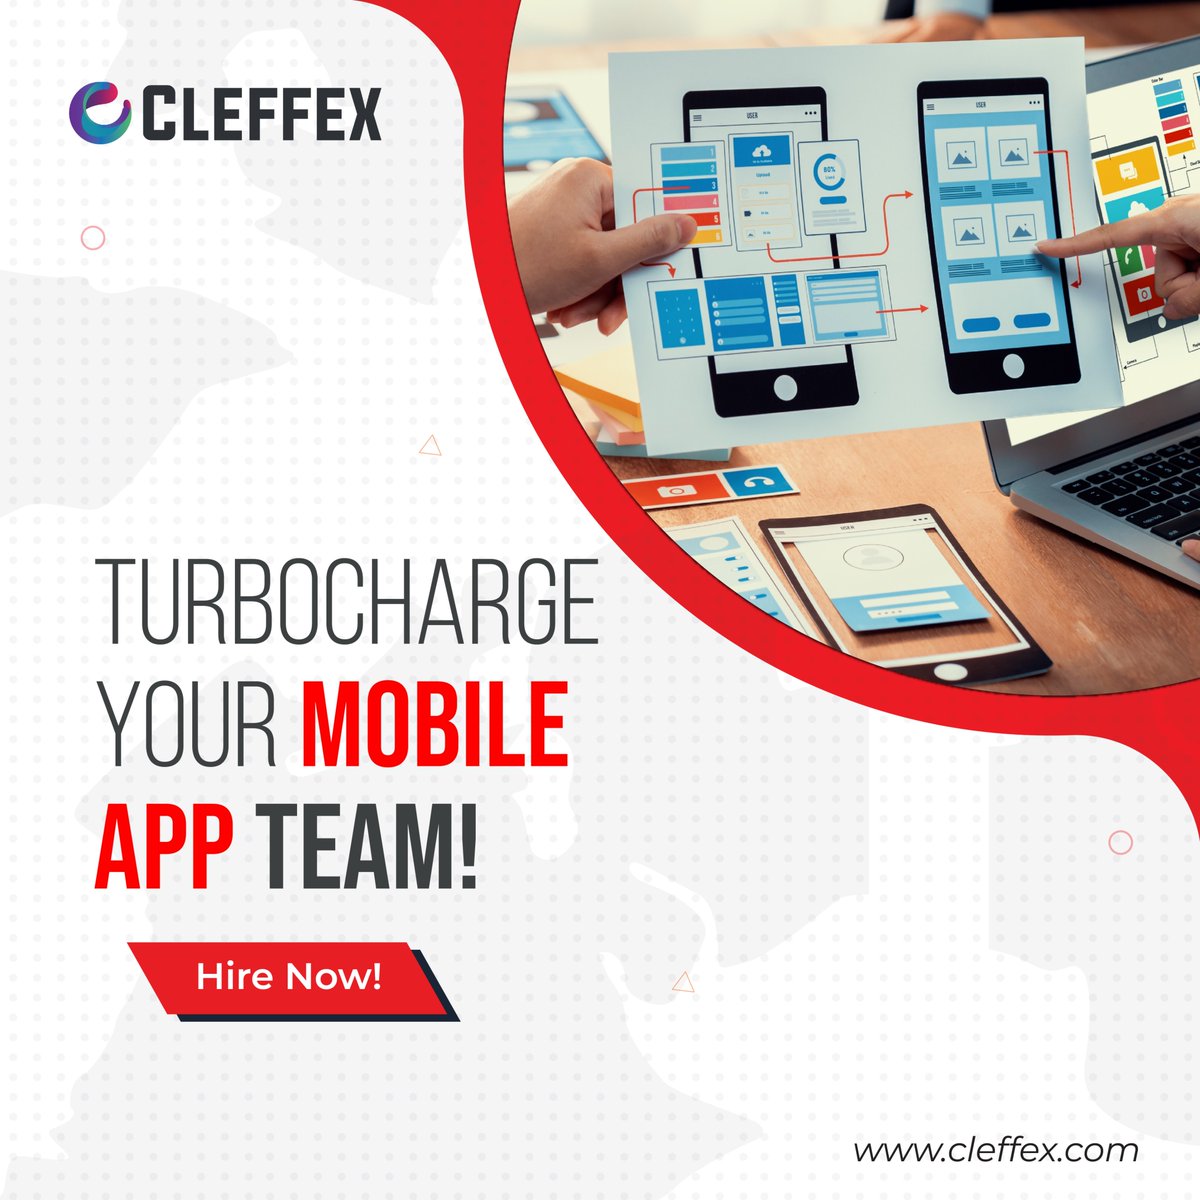 Supercharge your in-house #mobileappdevelopment team by adding our tech wizards! They will be a sure-shot way to enhance your #business goals in no time. cleffex.com/service/mobile…

#startup #ecommerceapp #mobileapplication #mobileapp #app #mobileappdesign #softwaredevelopment